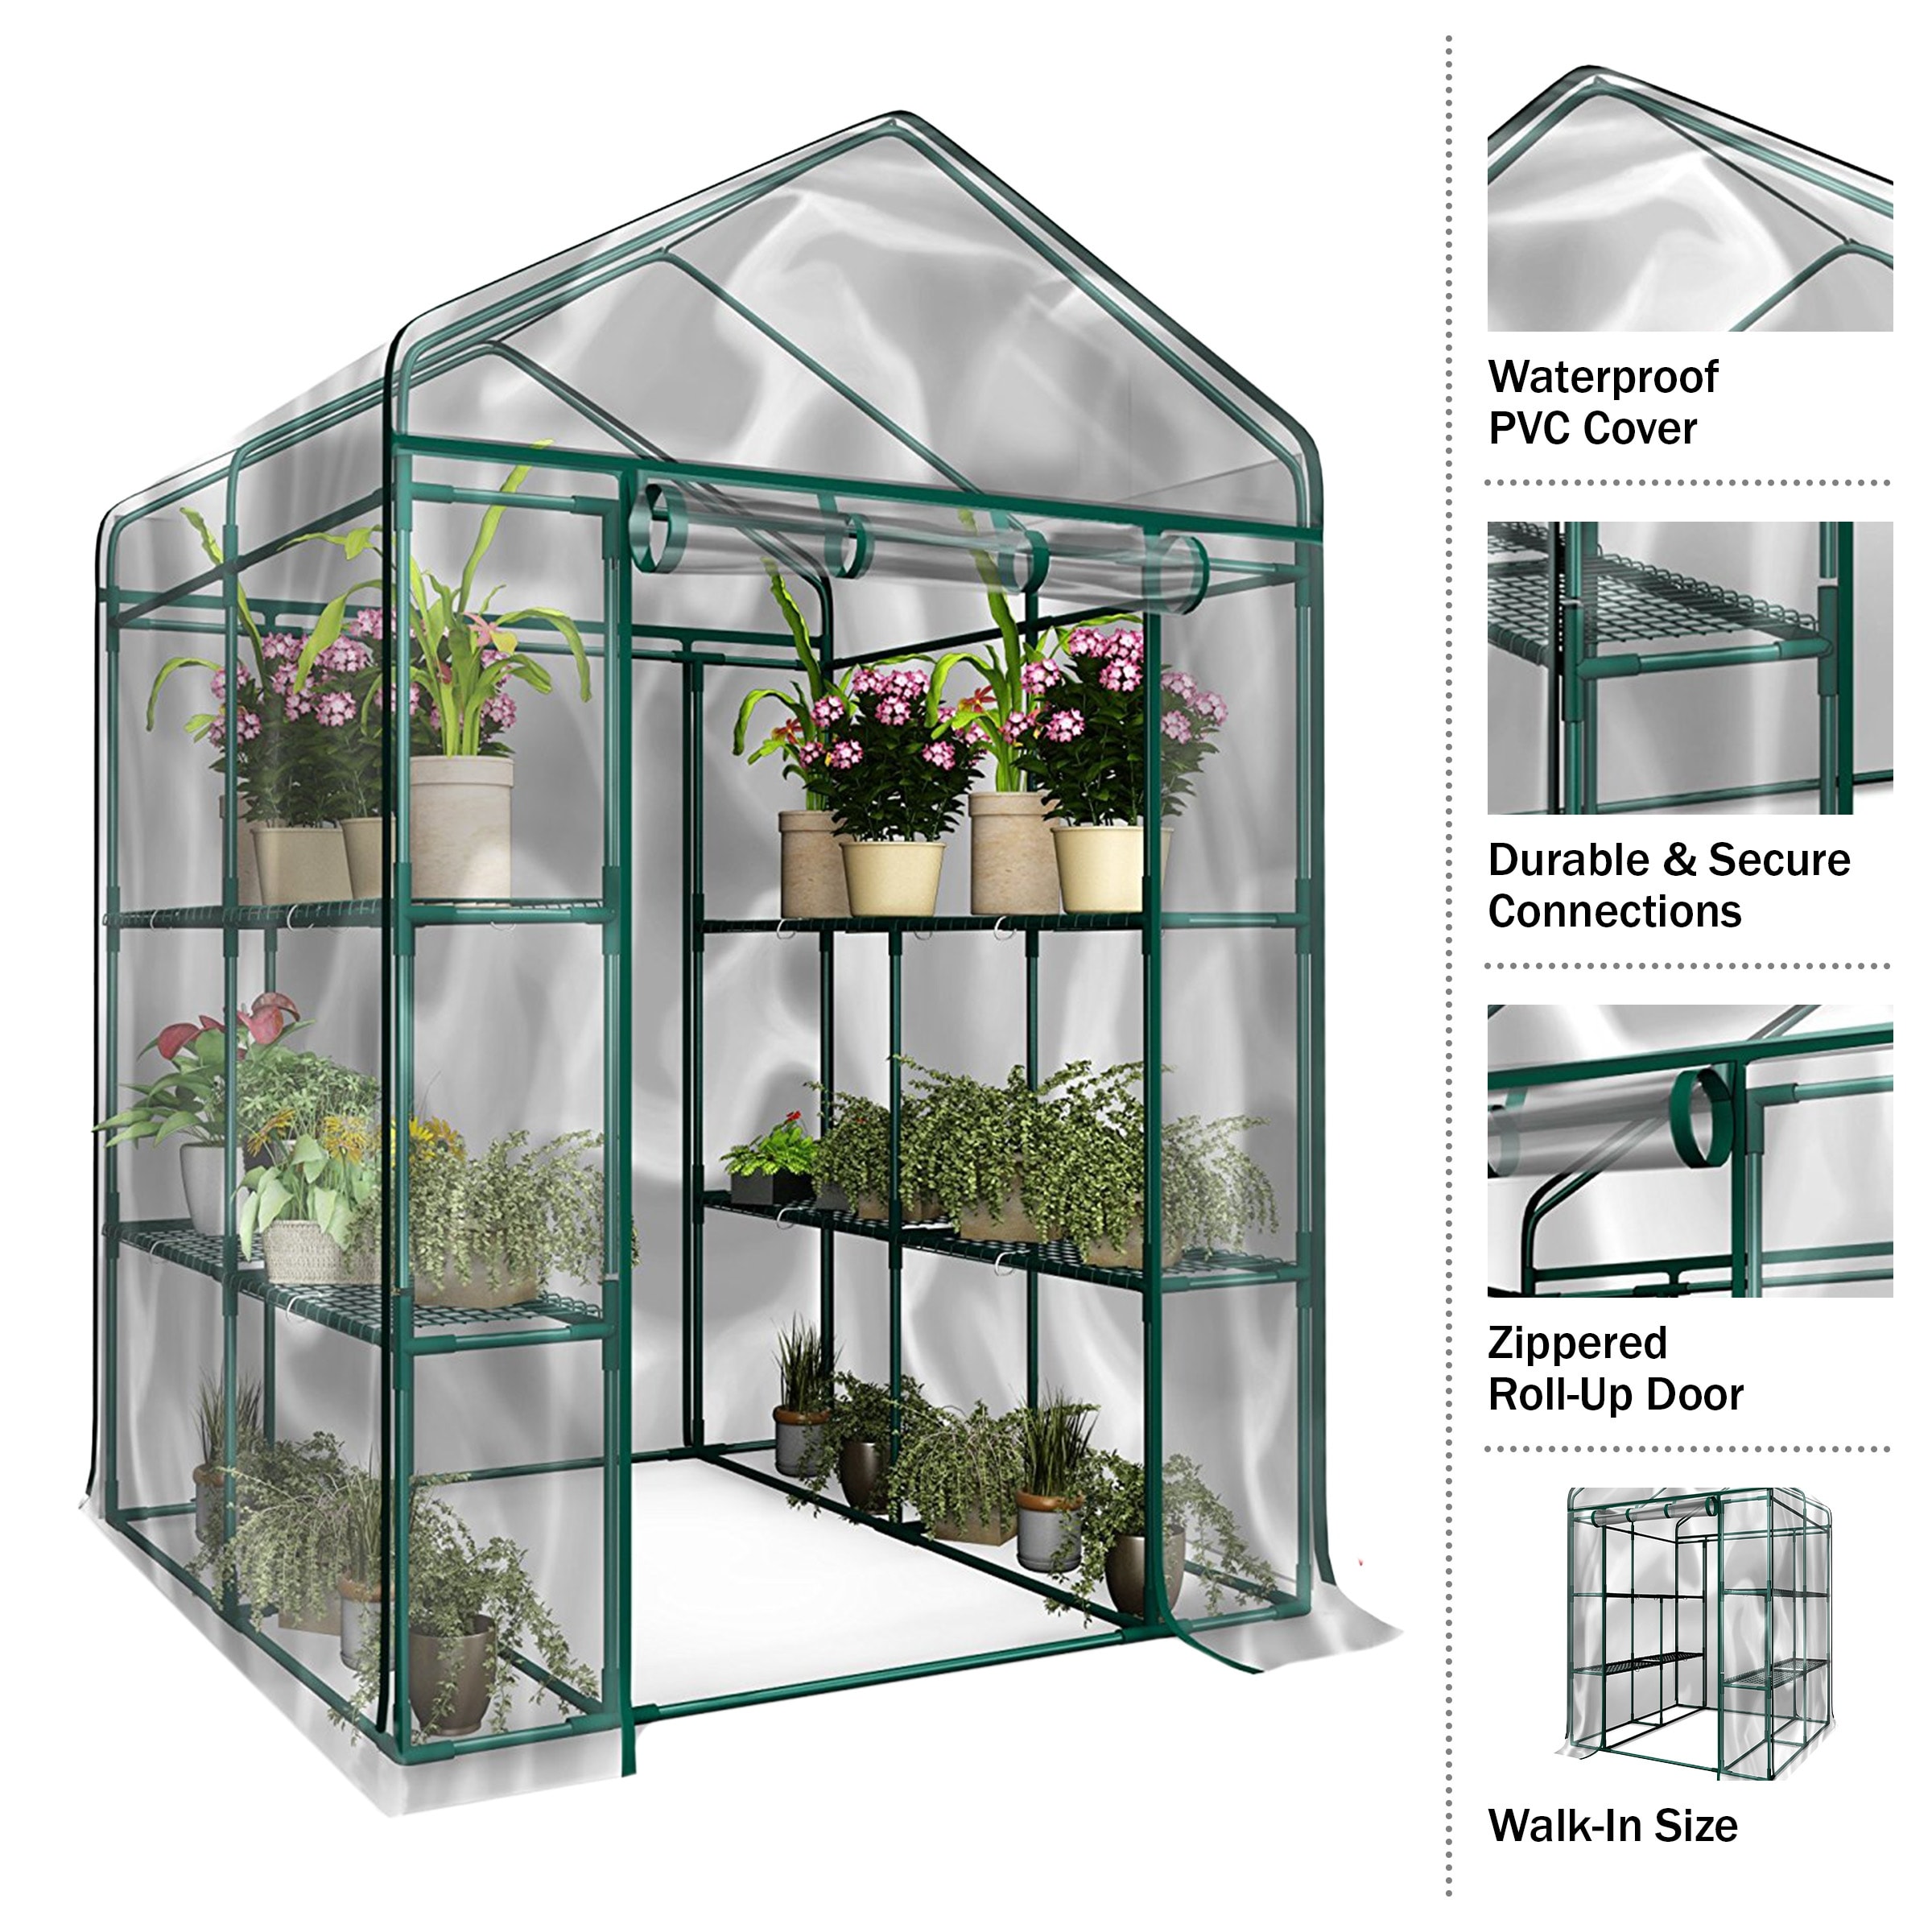 Walk-In Greenhouse with Shelves and PVC Cover for Indoor or Outdoor Use  by Home-Complete 56.3 x 56.3 x 76.7 Bed Bath  Beyond 22541626